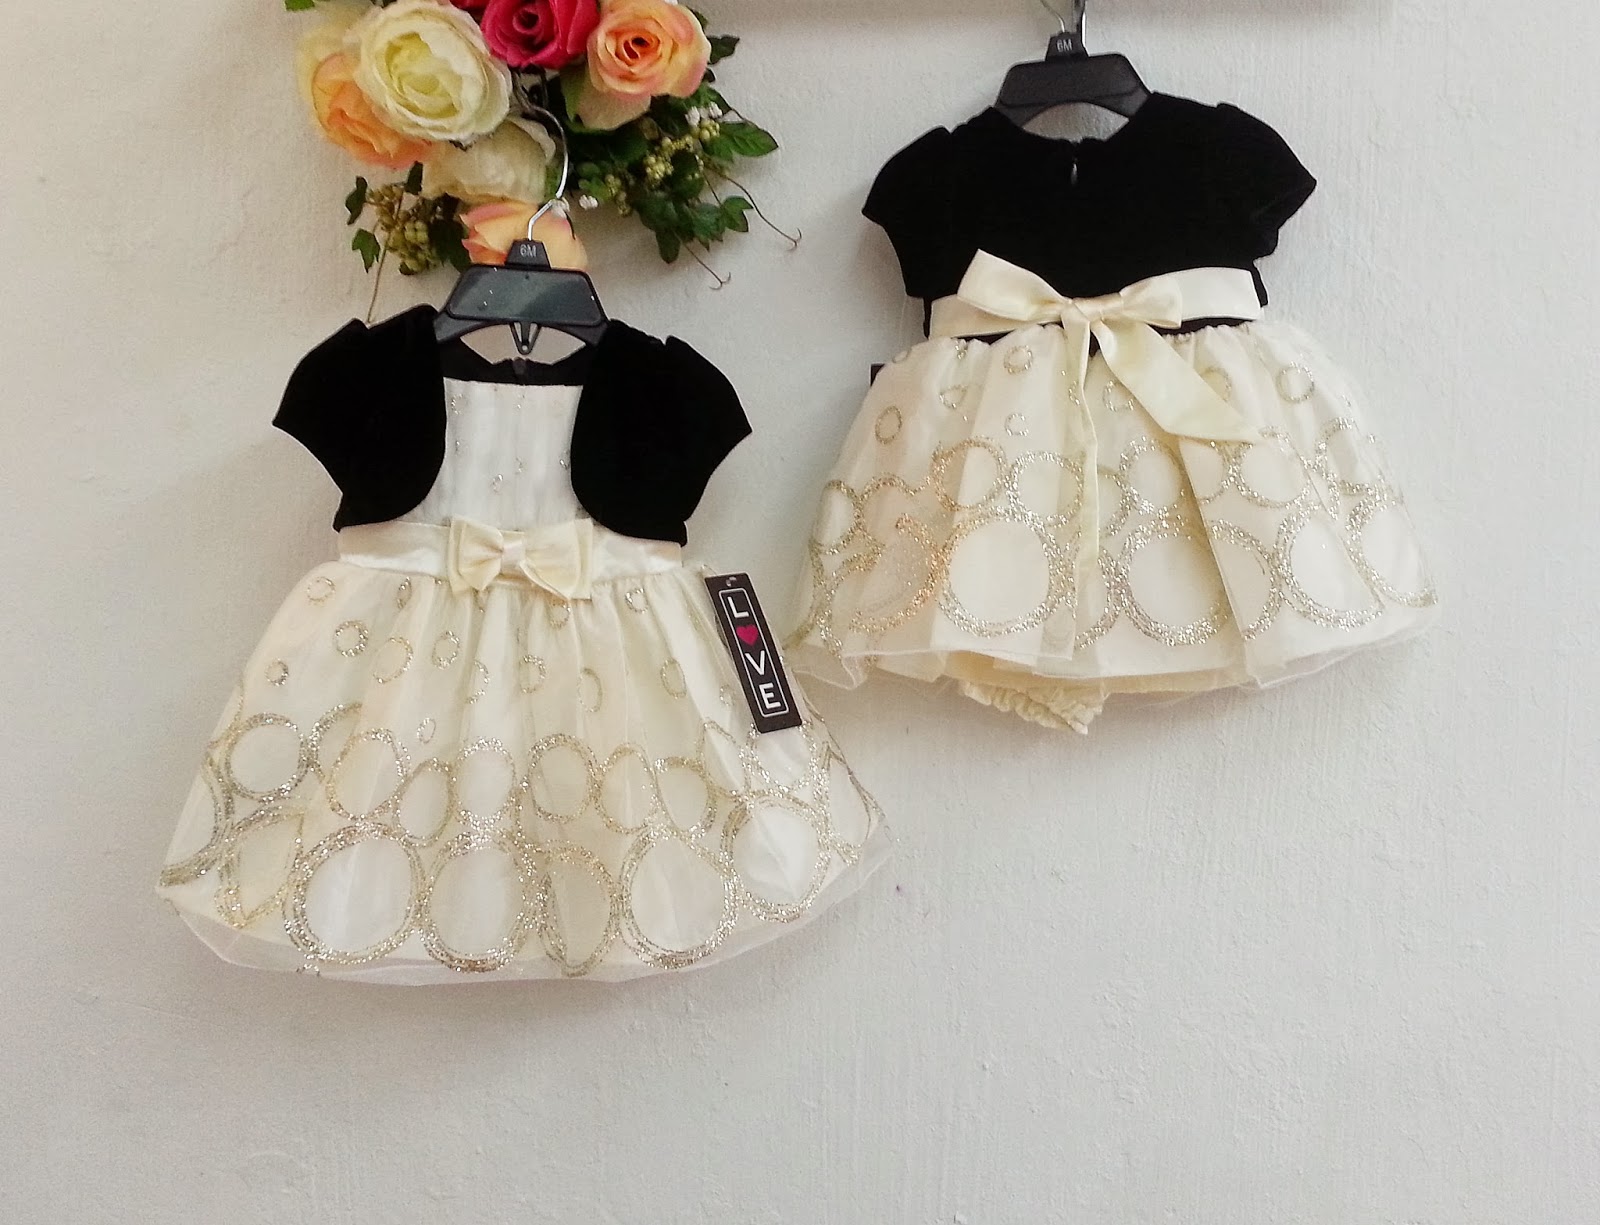 WHOLESALE BRANDED BABY CLOTHES - 1senses: Ready Stock!